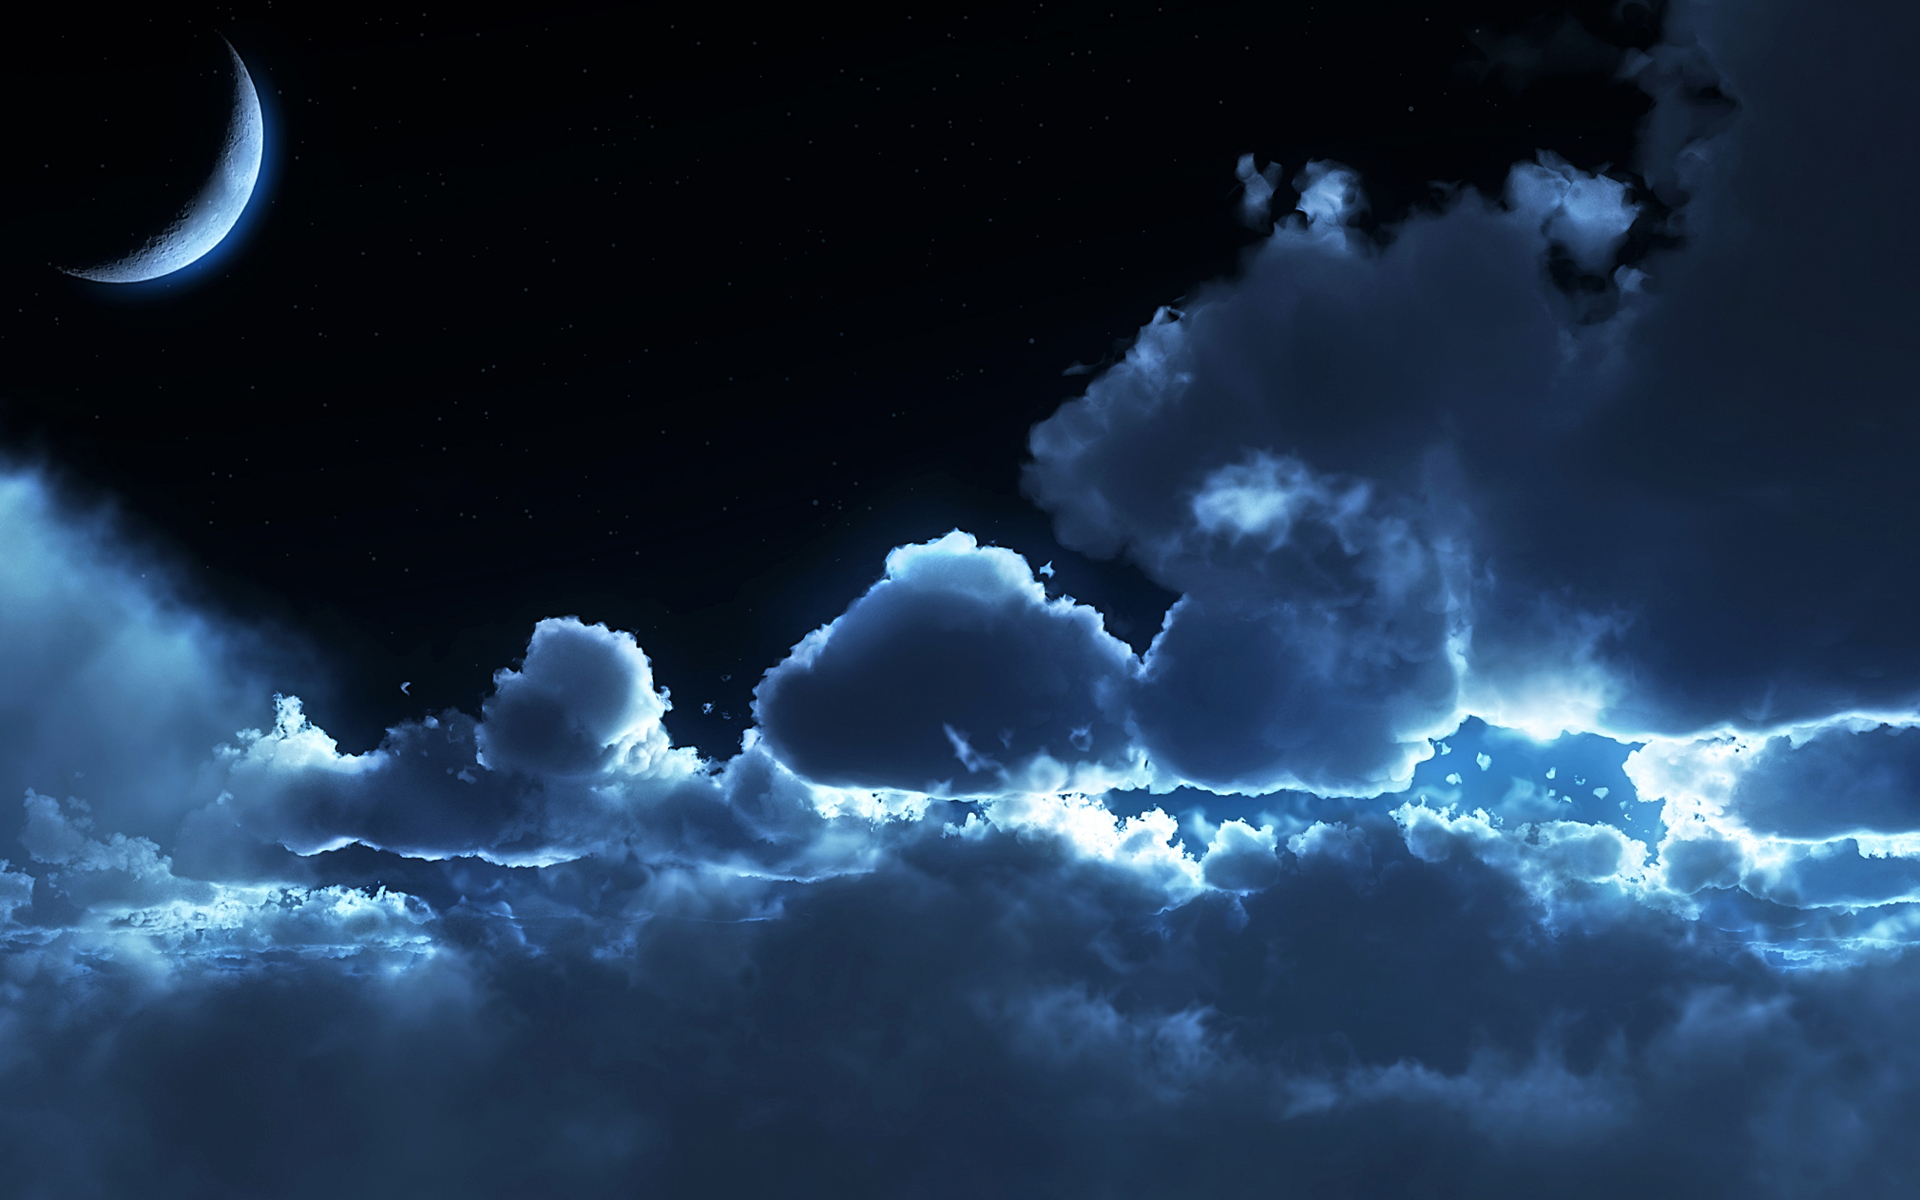  in the night sky wallpapers and images   wallpapers pictures photos